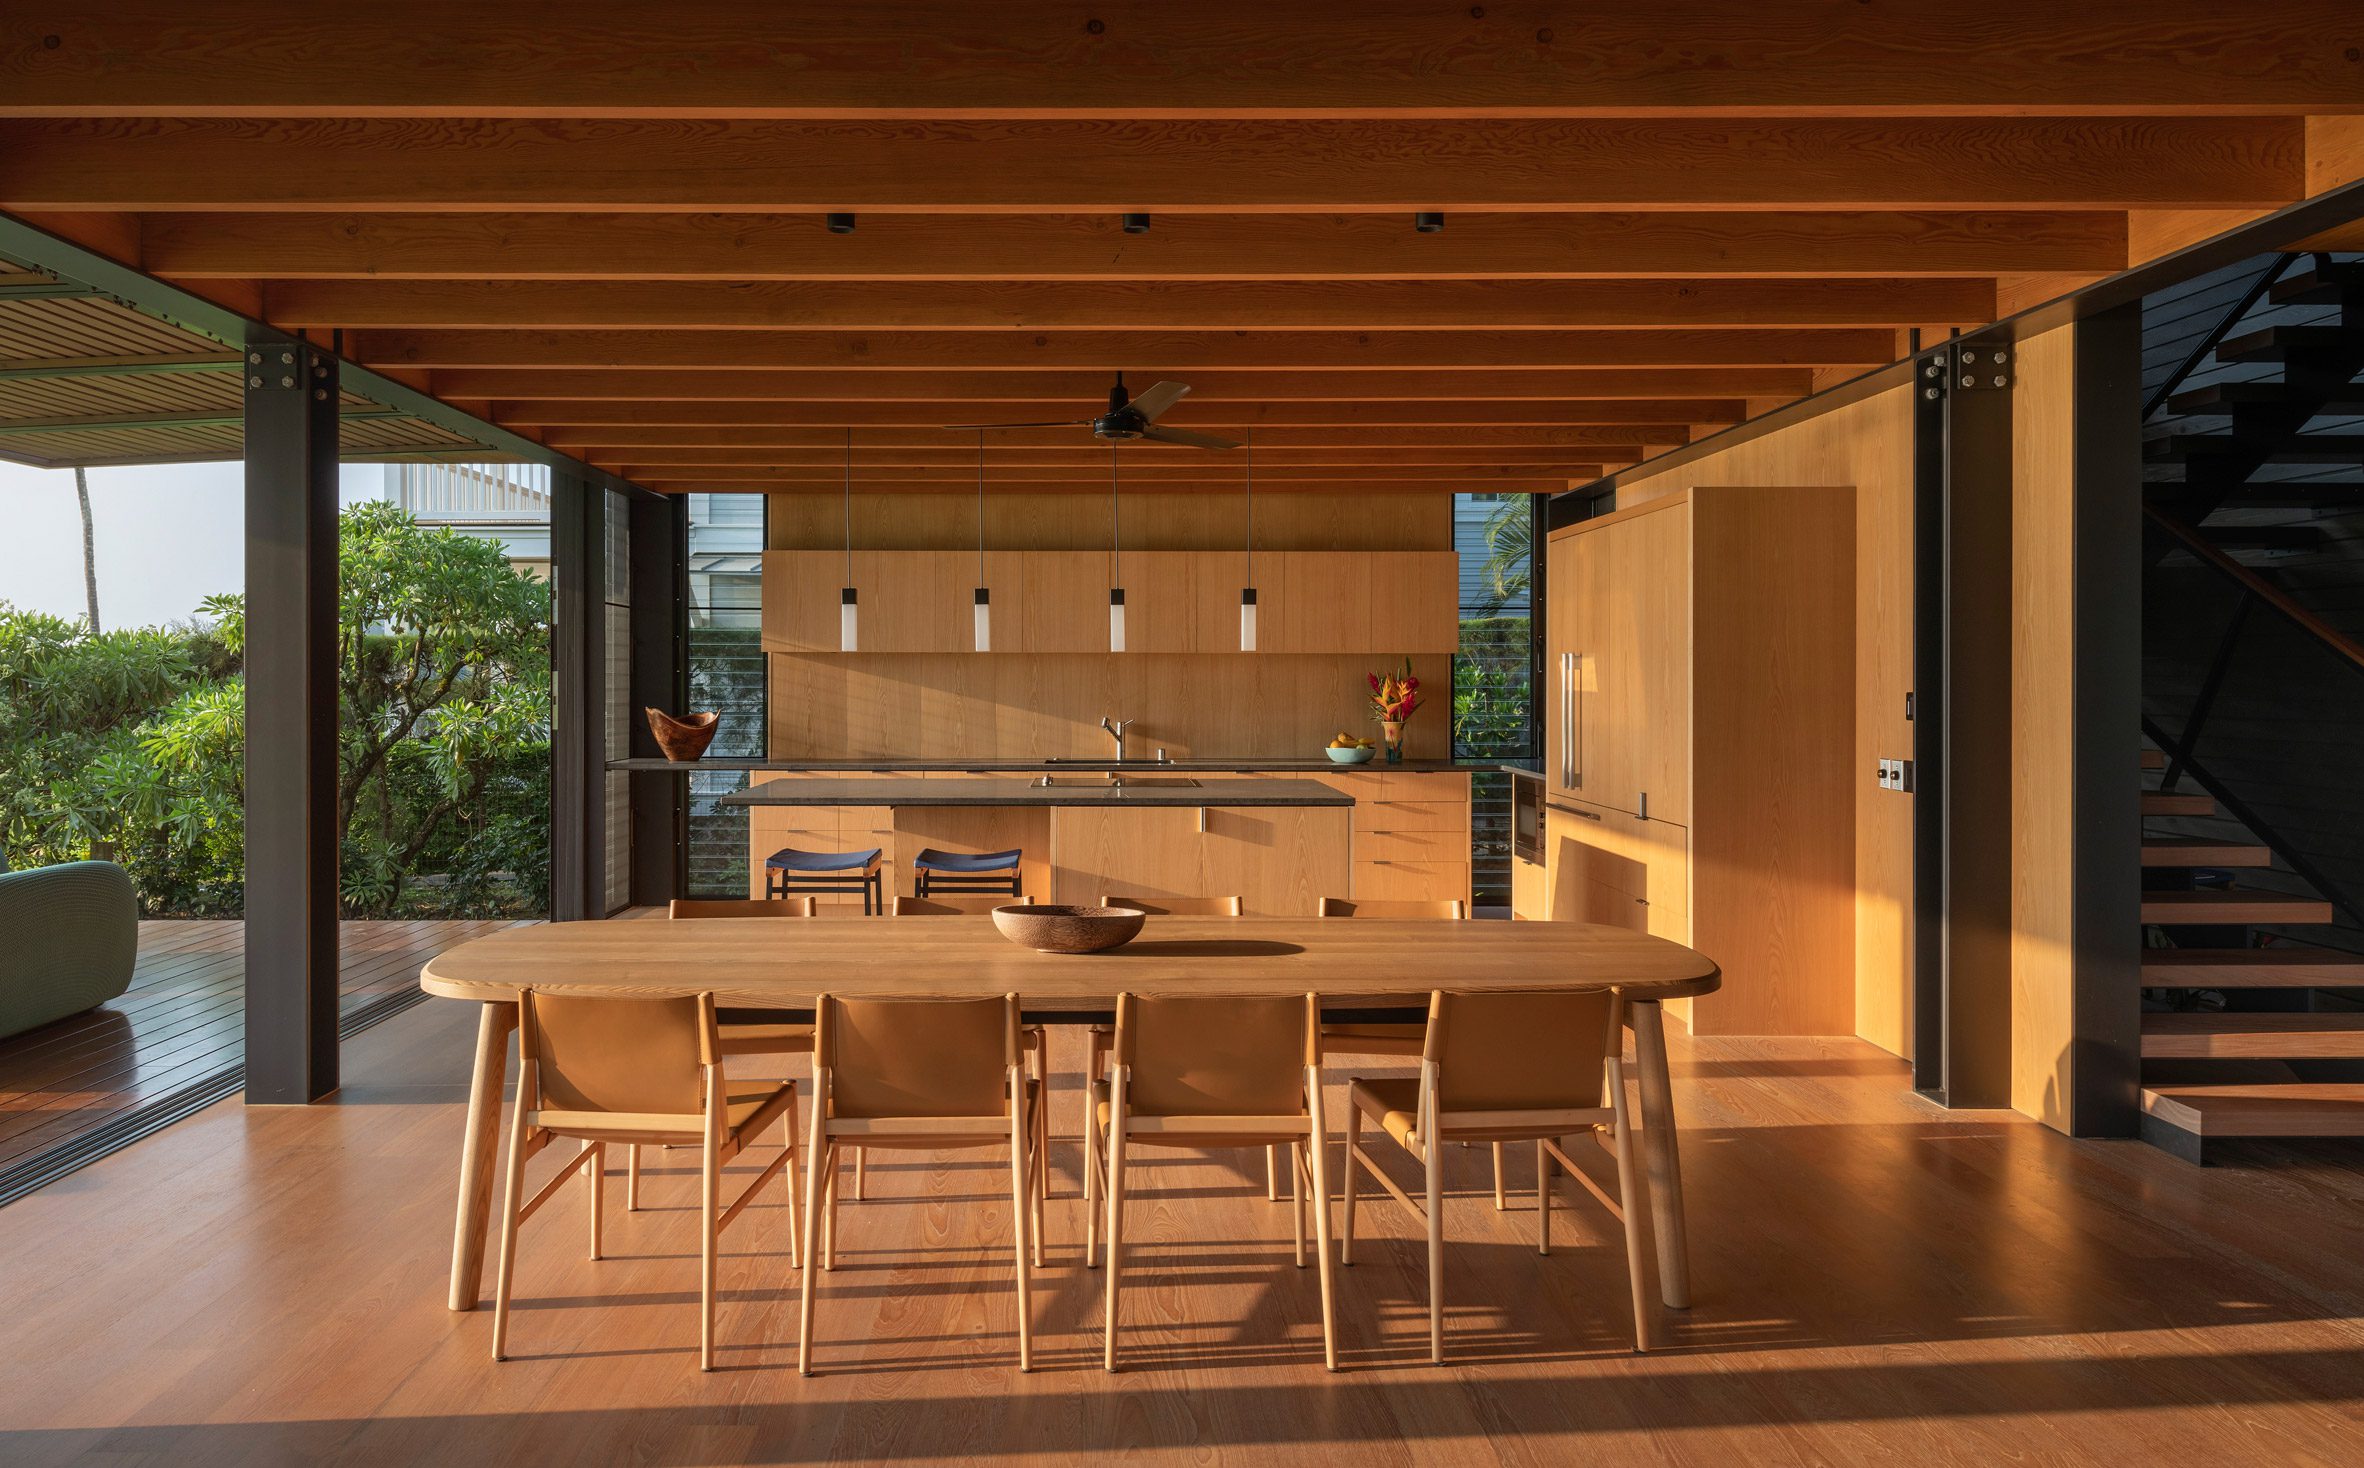 Timber-clad kitchen within Olson Kundig house in Hawaii